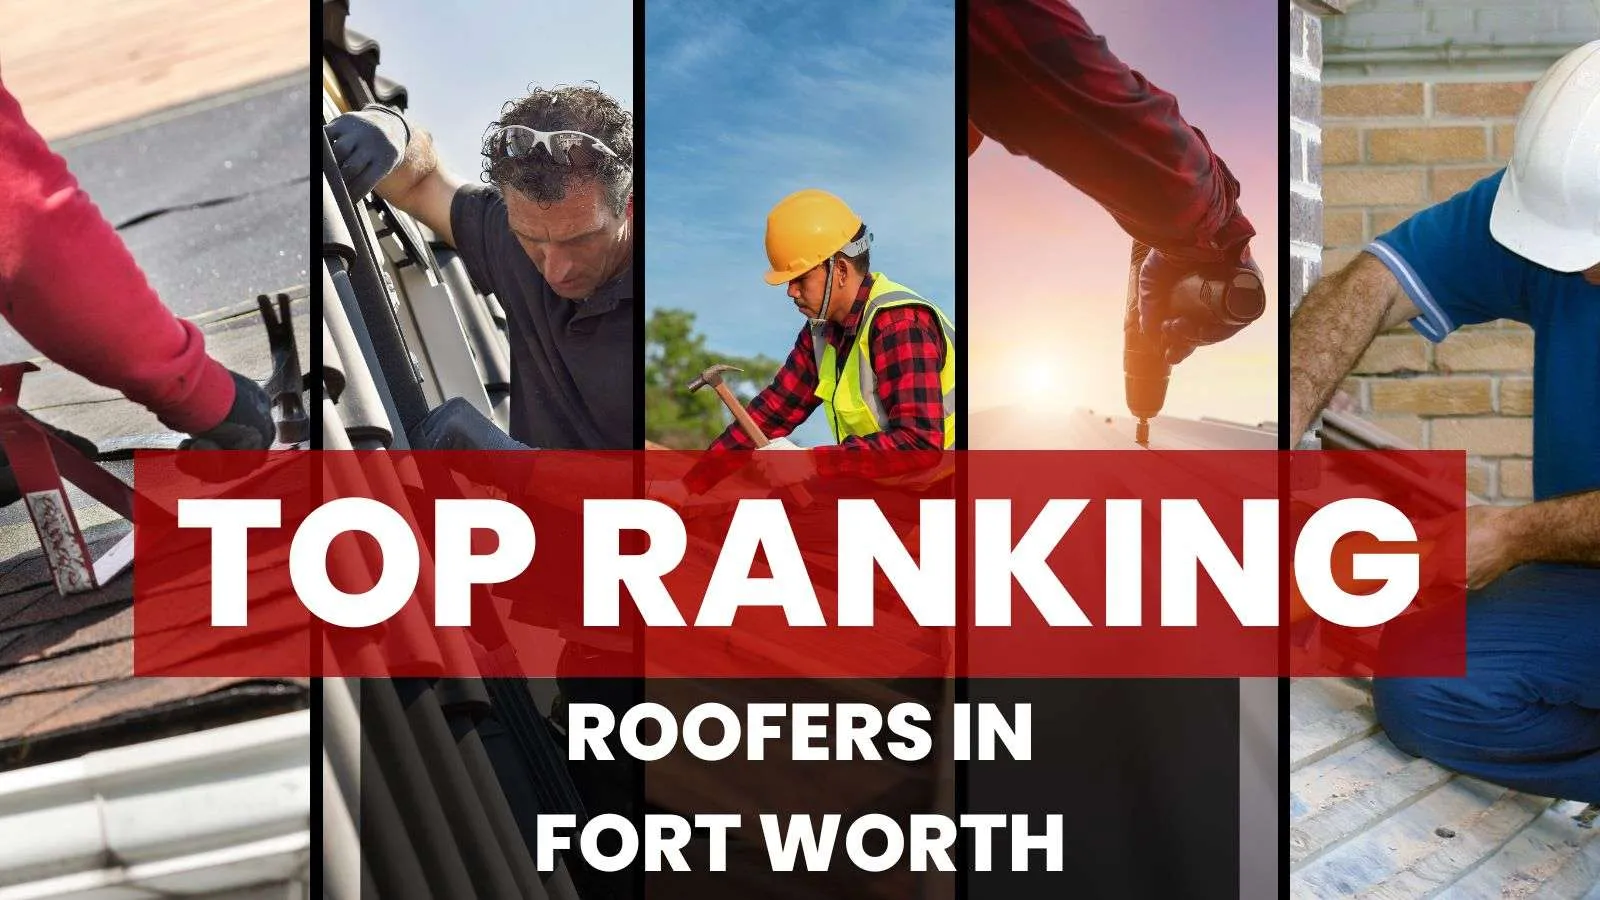 top ranking roofers in fort worth - bighomeprojects.com